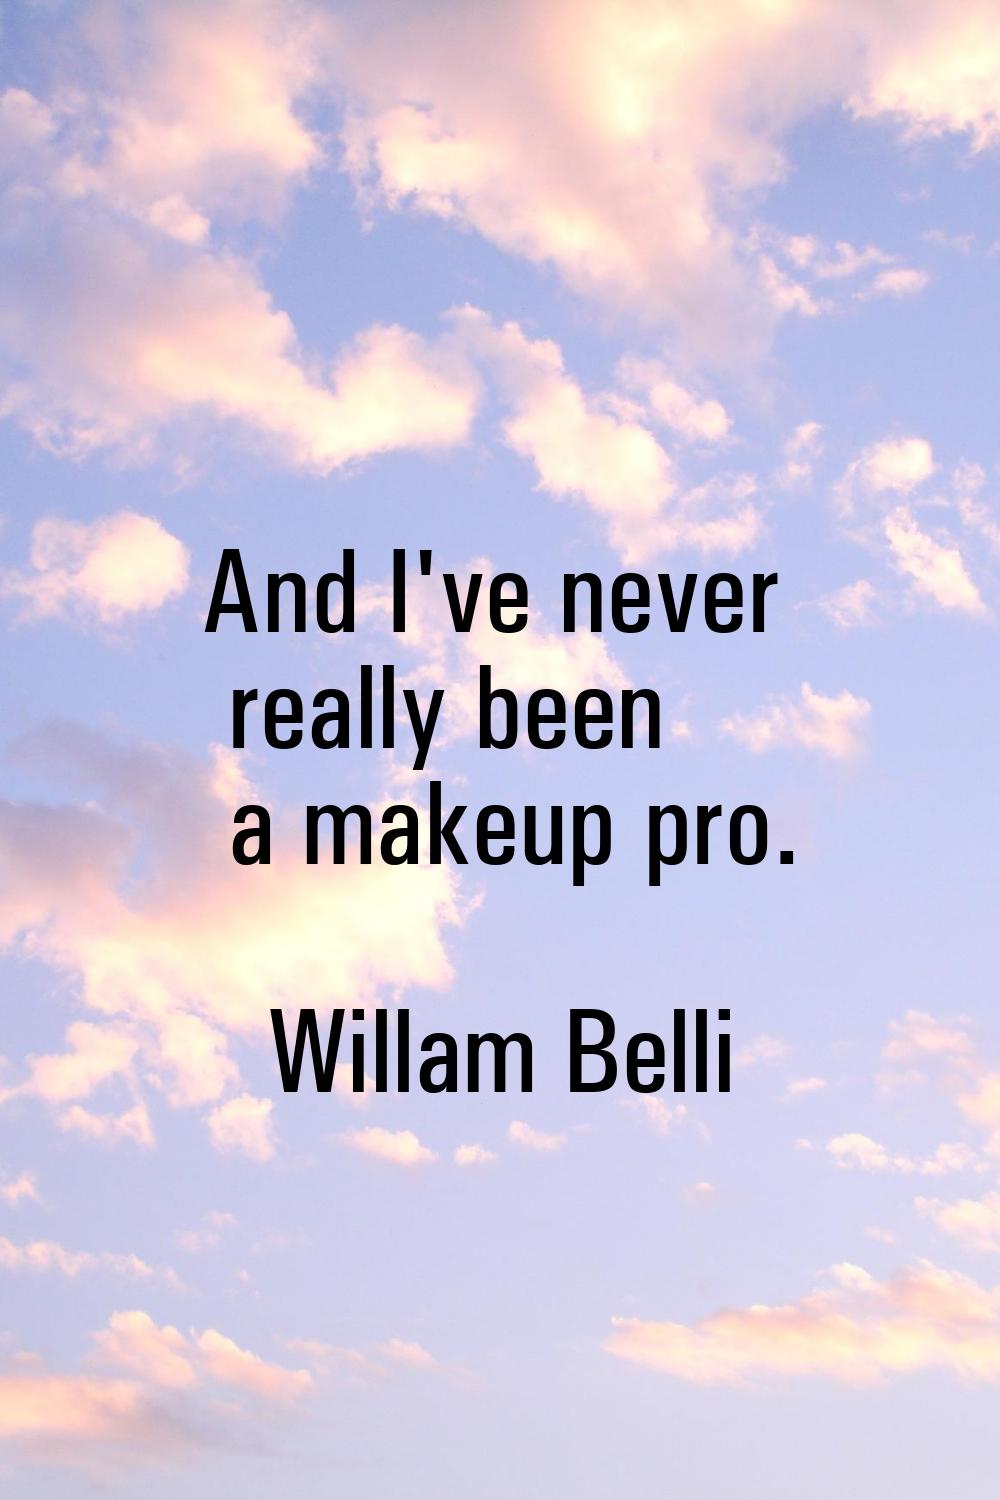 And I've never really been a makeup pro.